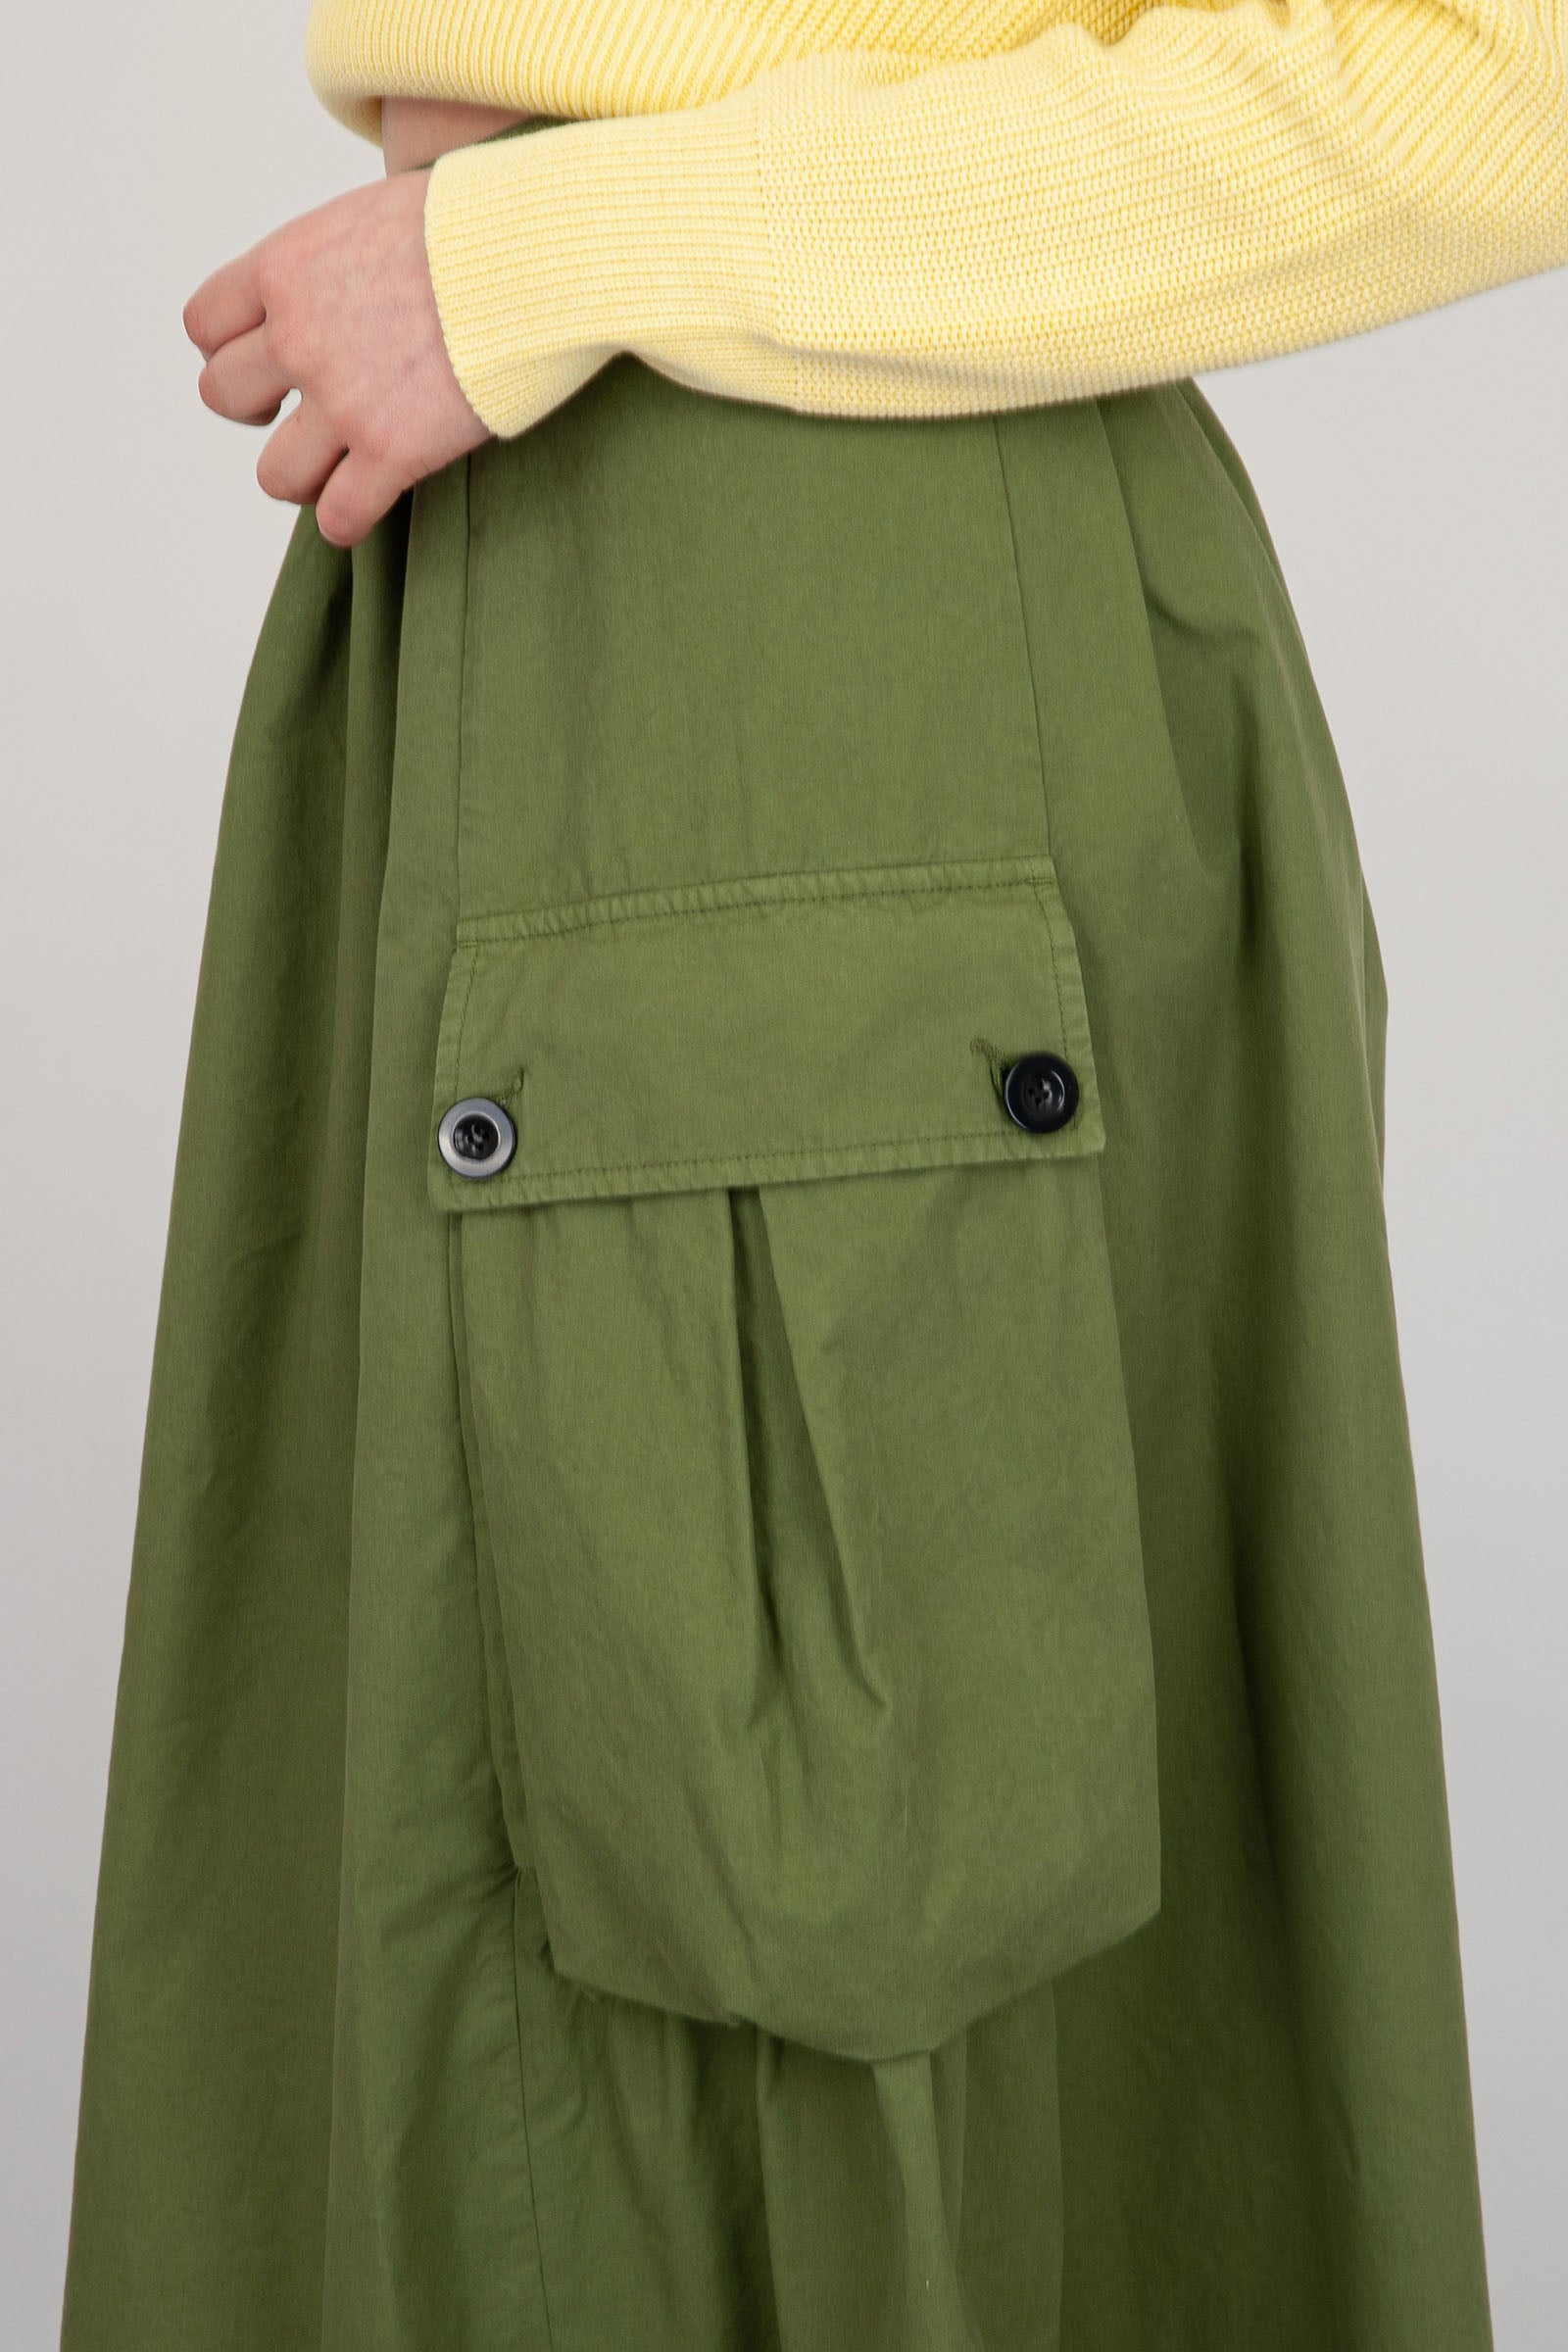 Department Five Selma Skirt in Military Green Cotton - 3